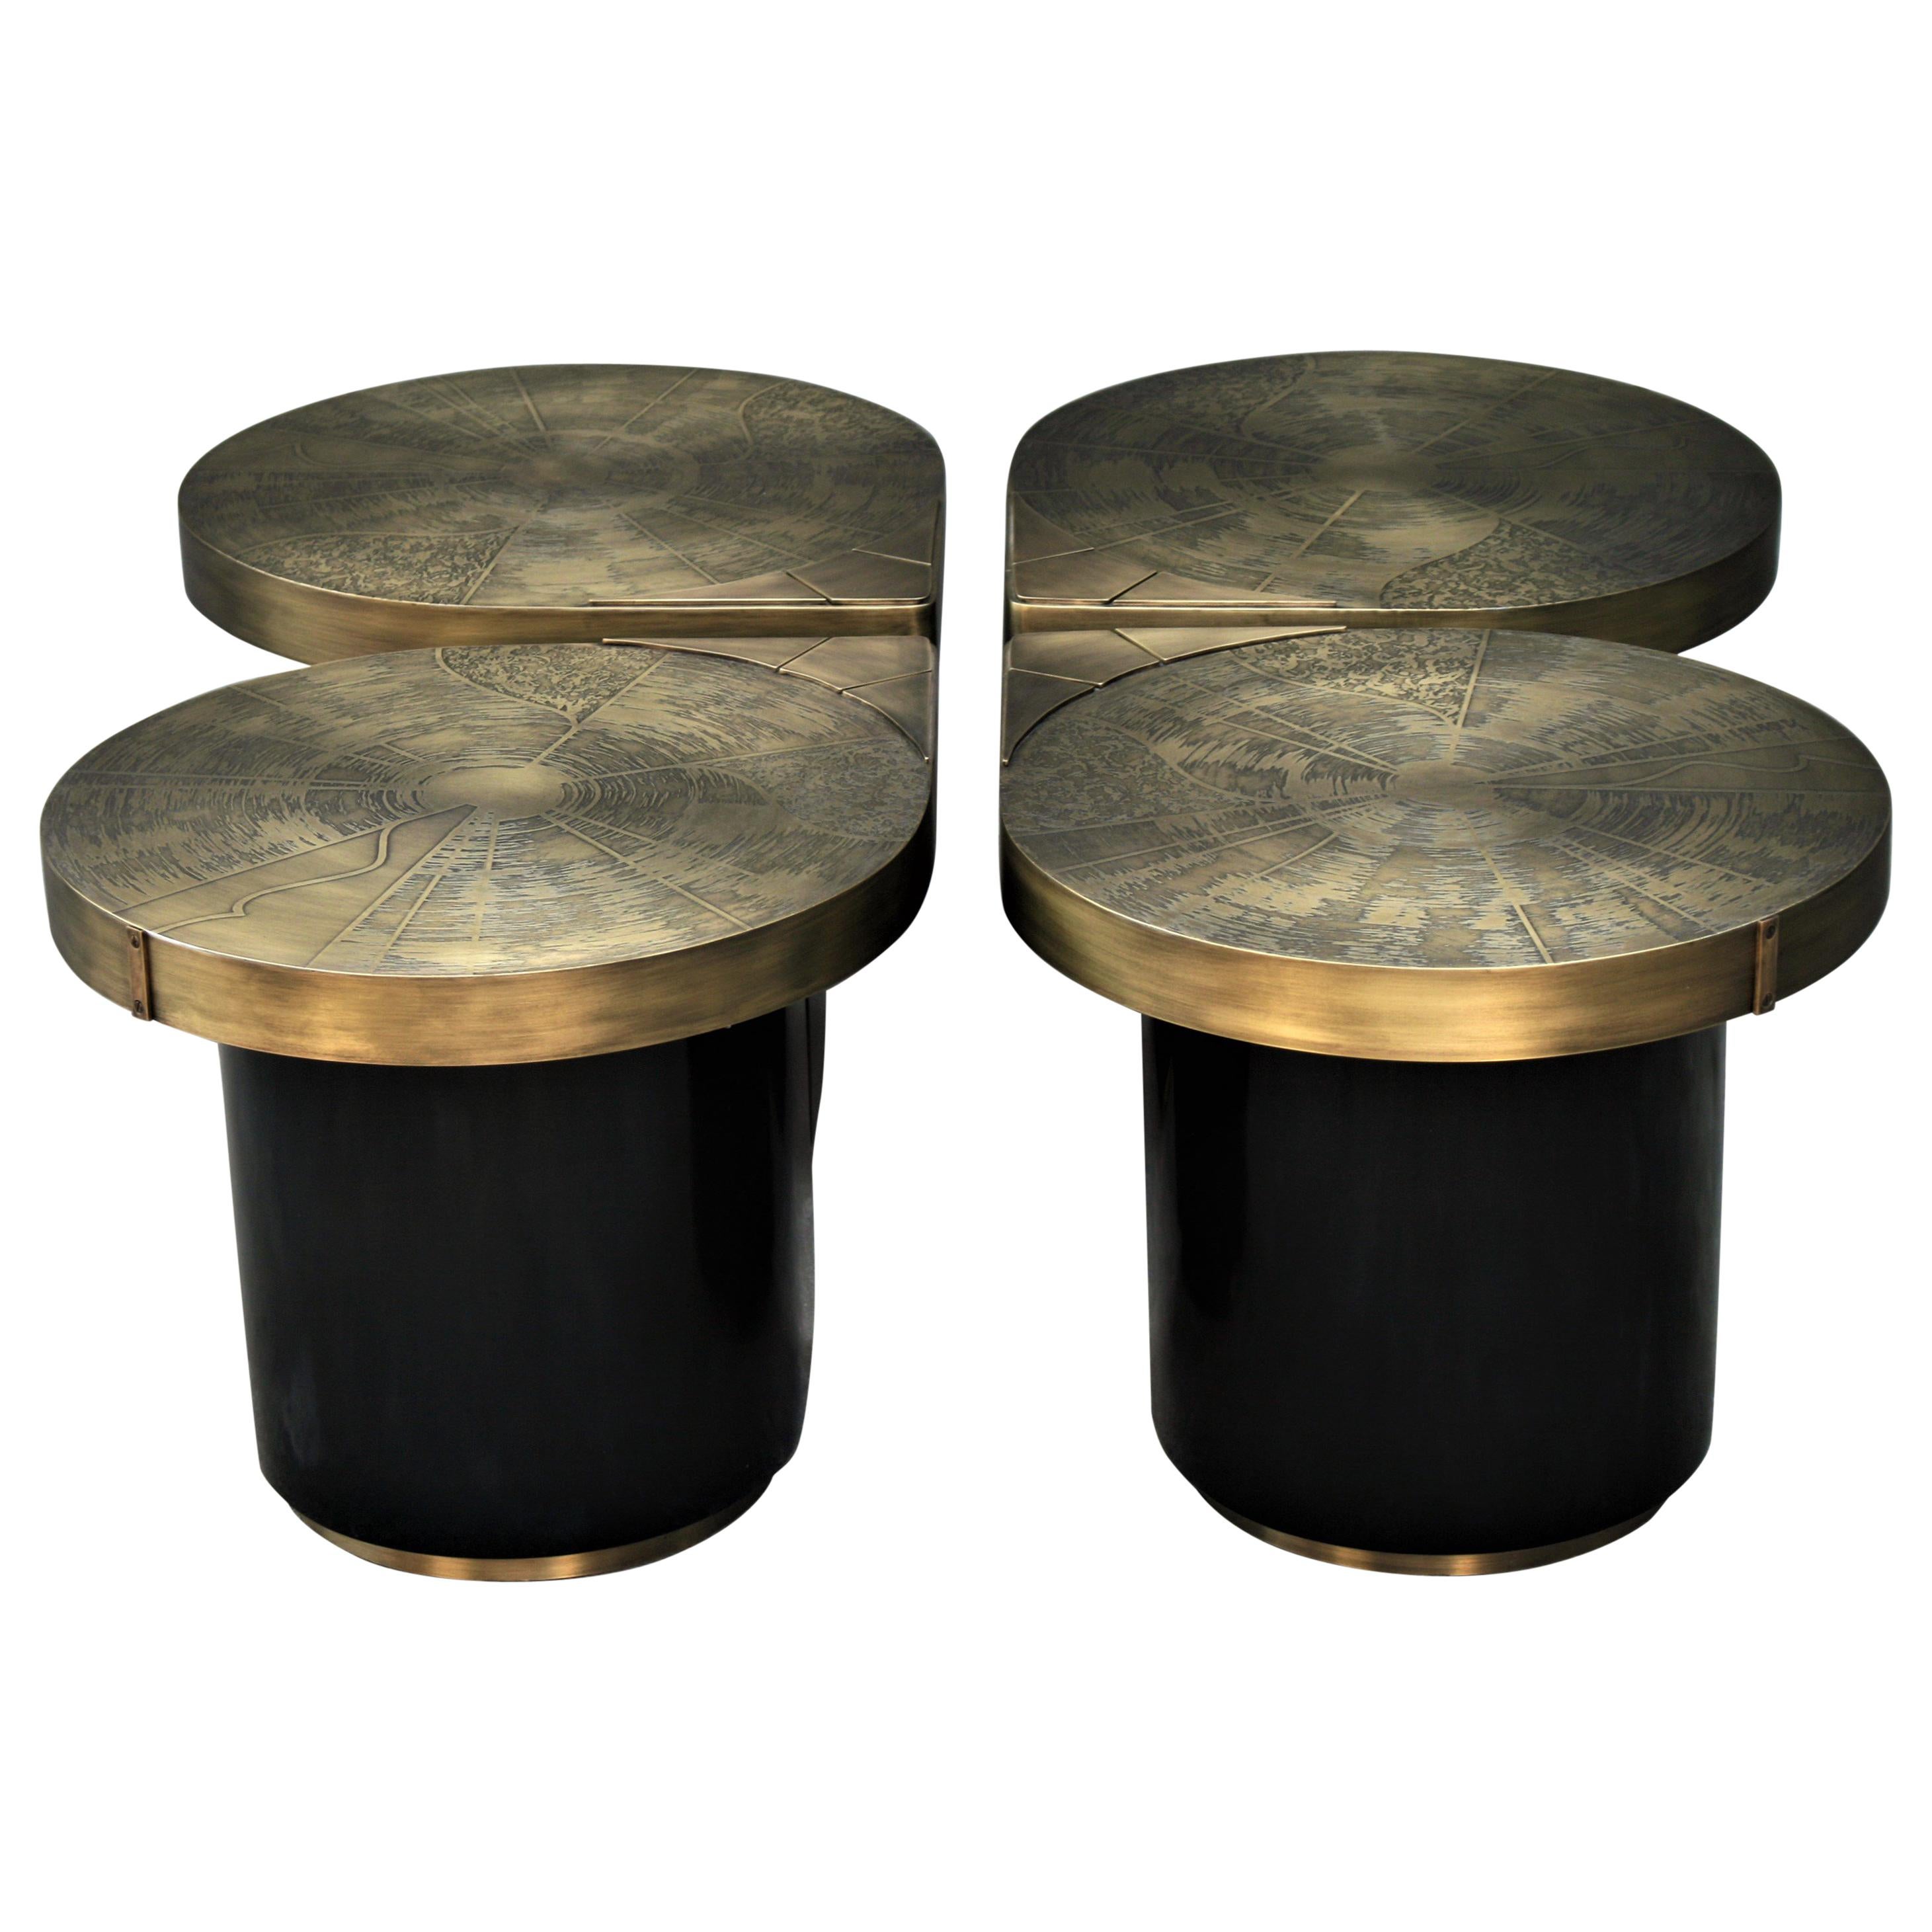 Four Matching Coffee Tables, Teardrops, Patinated Acid Etched Brass im Angebot